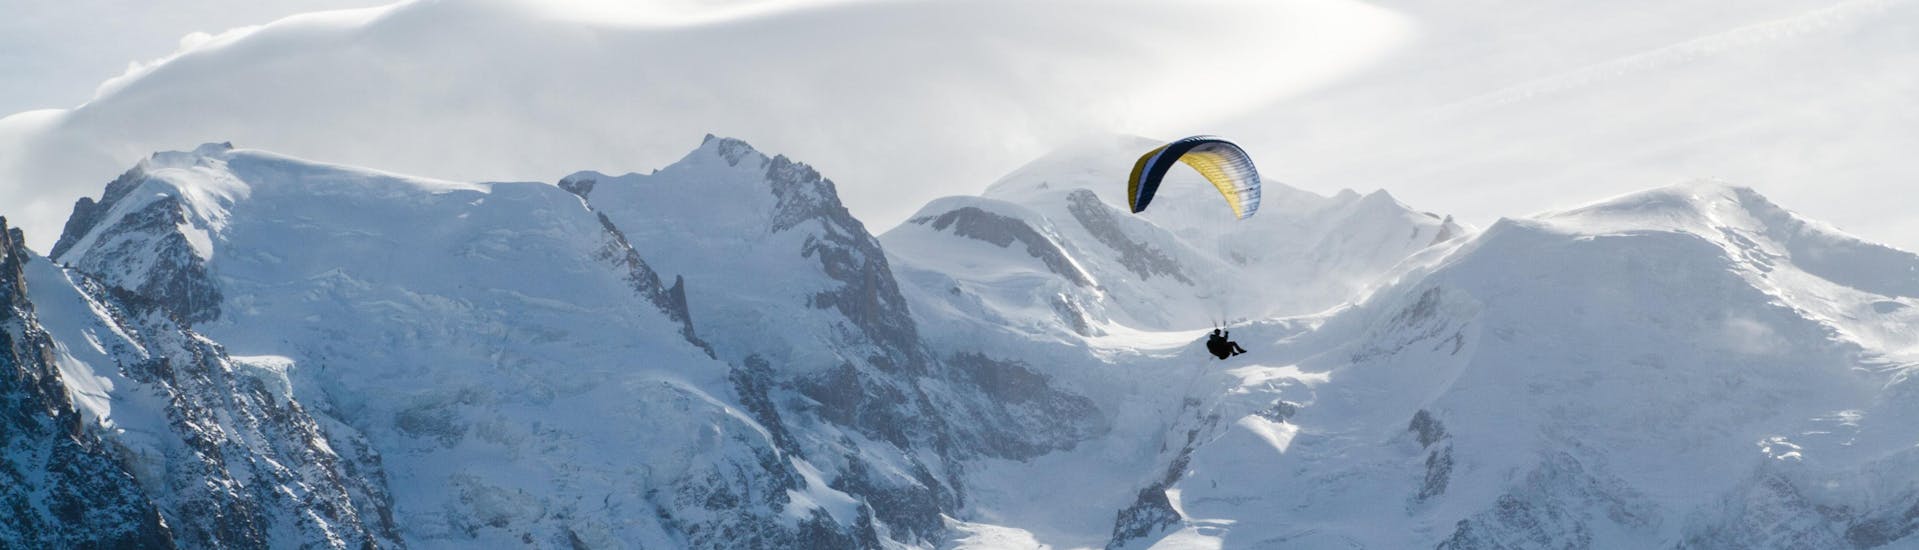 A person is doing a paragliding flight in the Chamonix valley with the snowy mountains in the background.